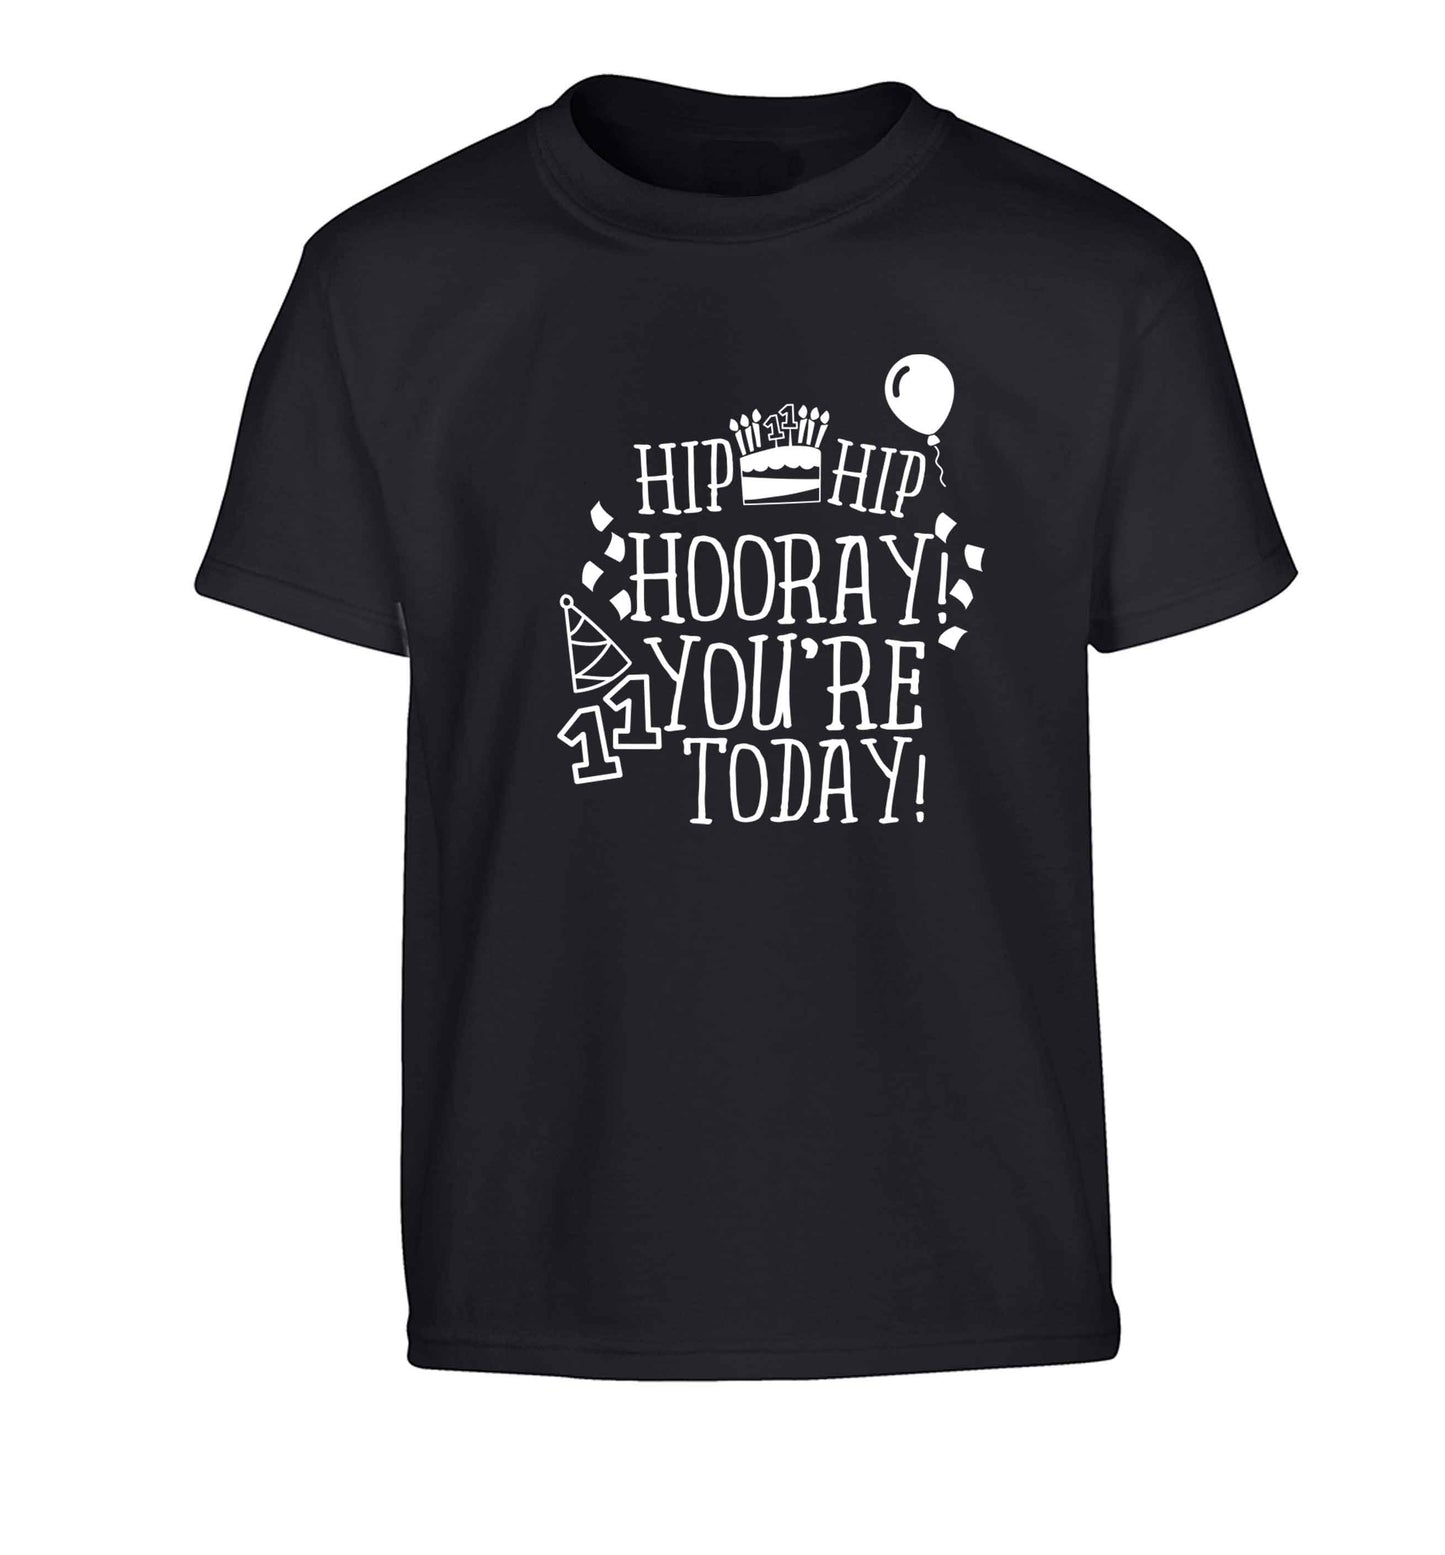 Hip hip hooray I you're eleven today! Children's black Tshirt 12-13 Years